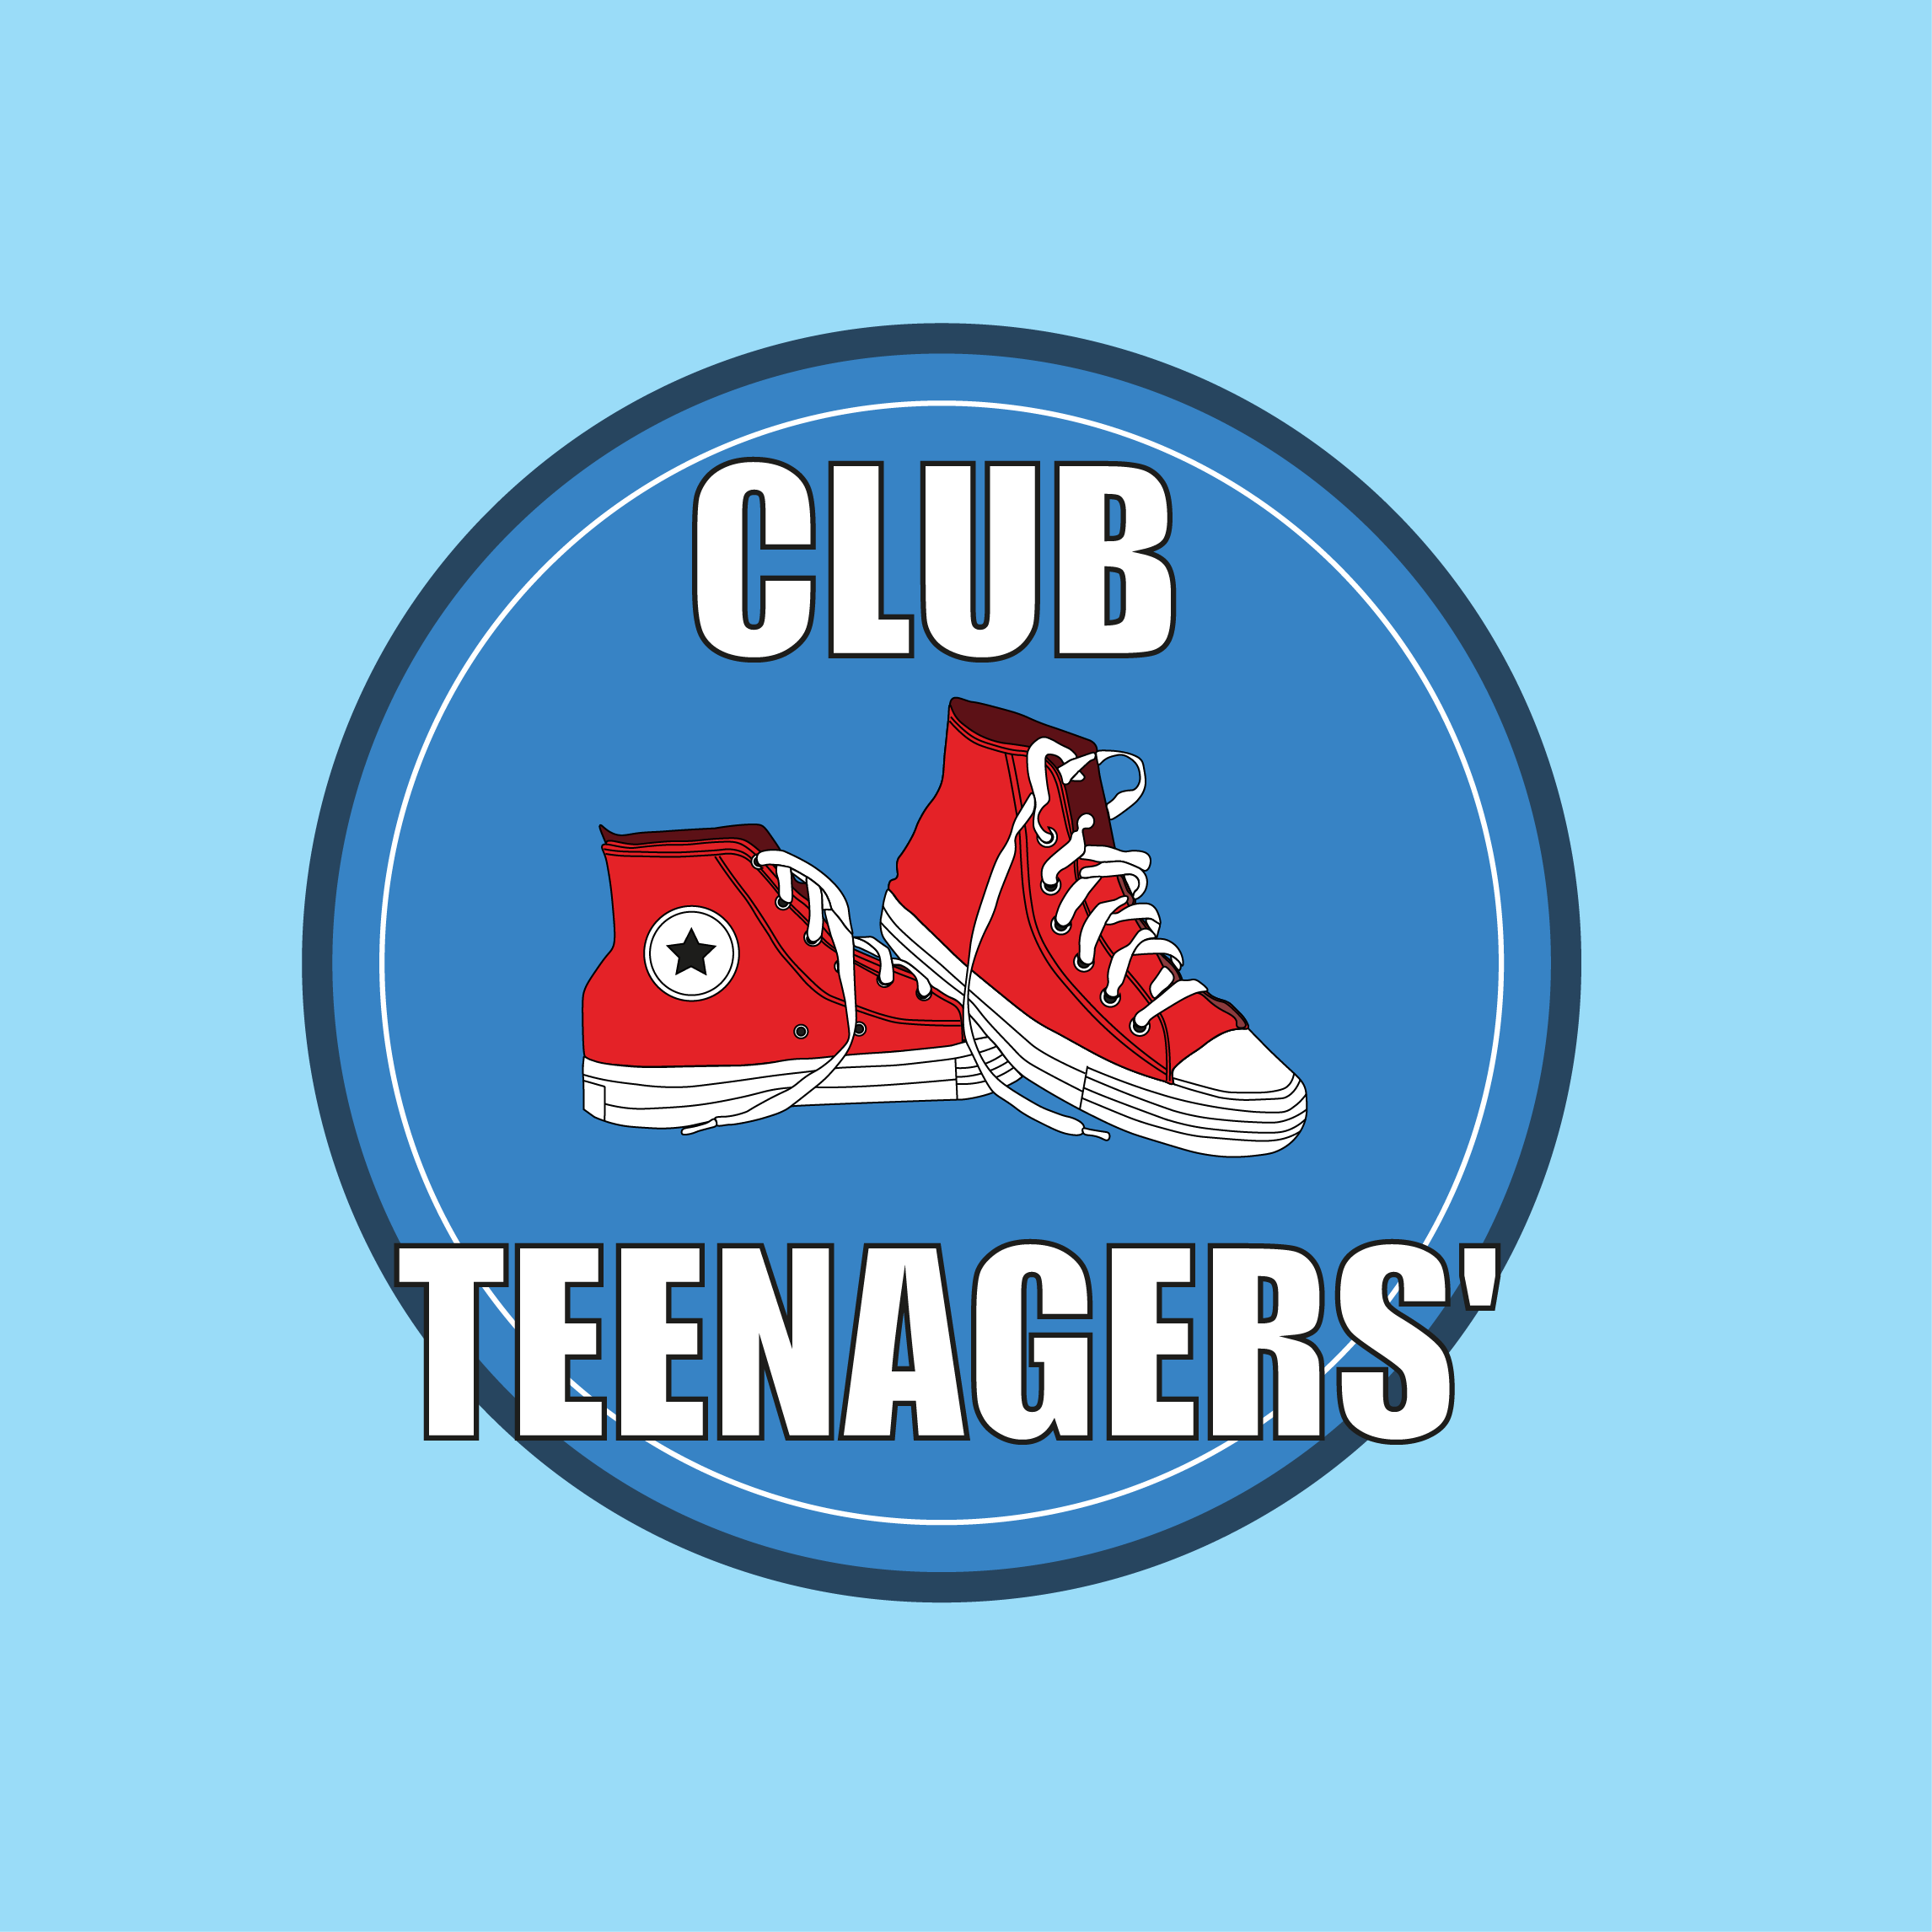 Cover for the Book – “Teenagers Club” main cover.